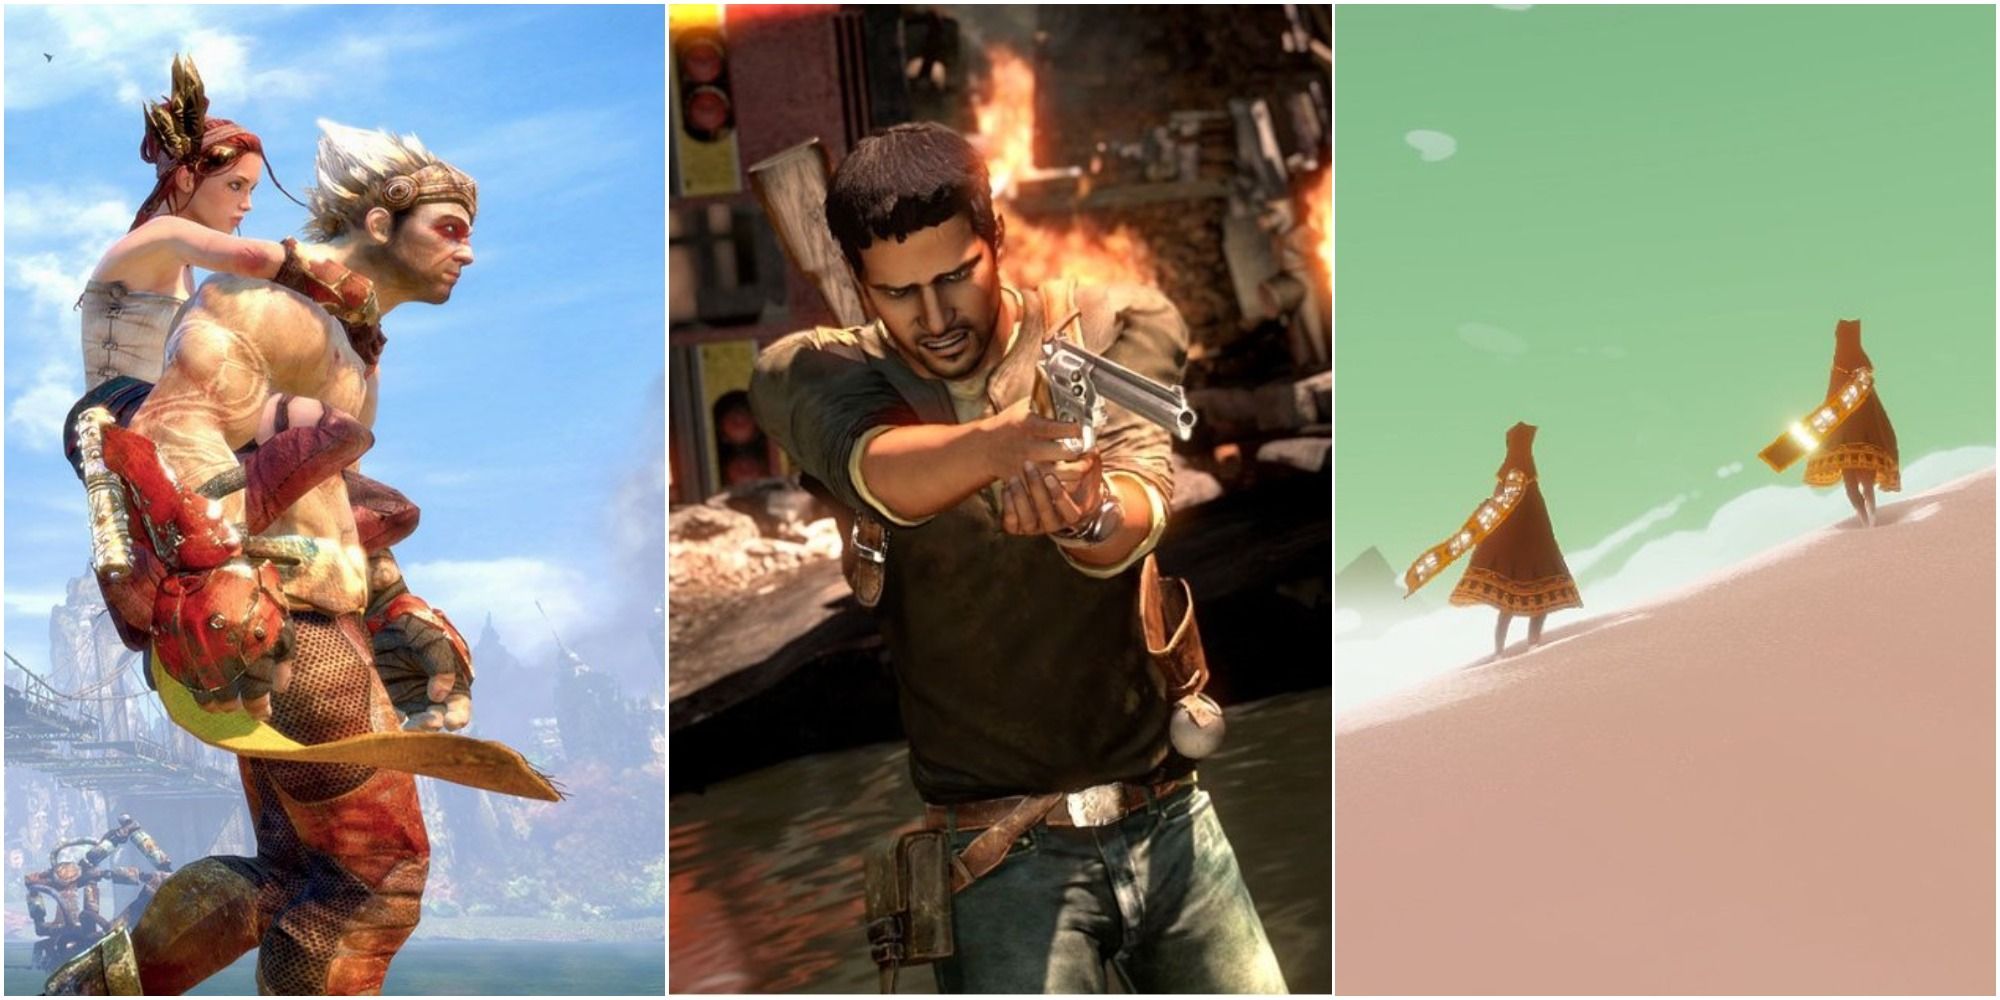 PS3 screenshot collage of Enslaved uncharted 2 and journey